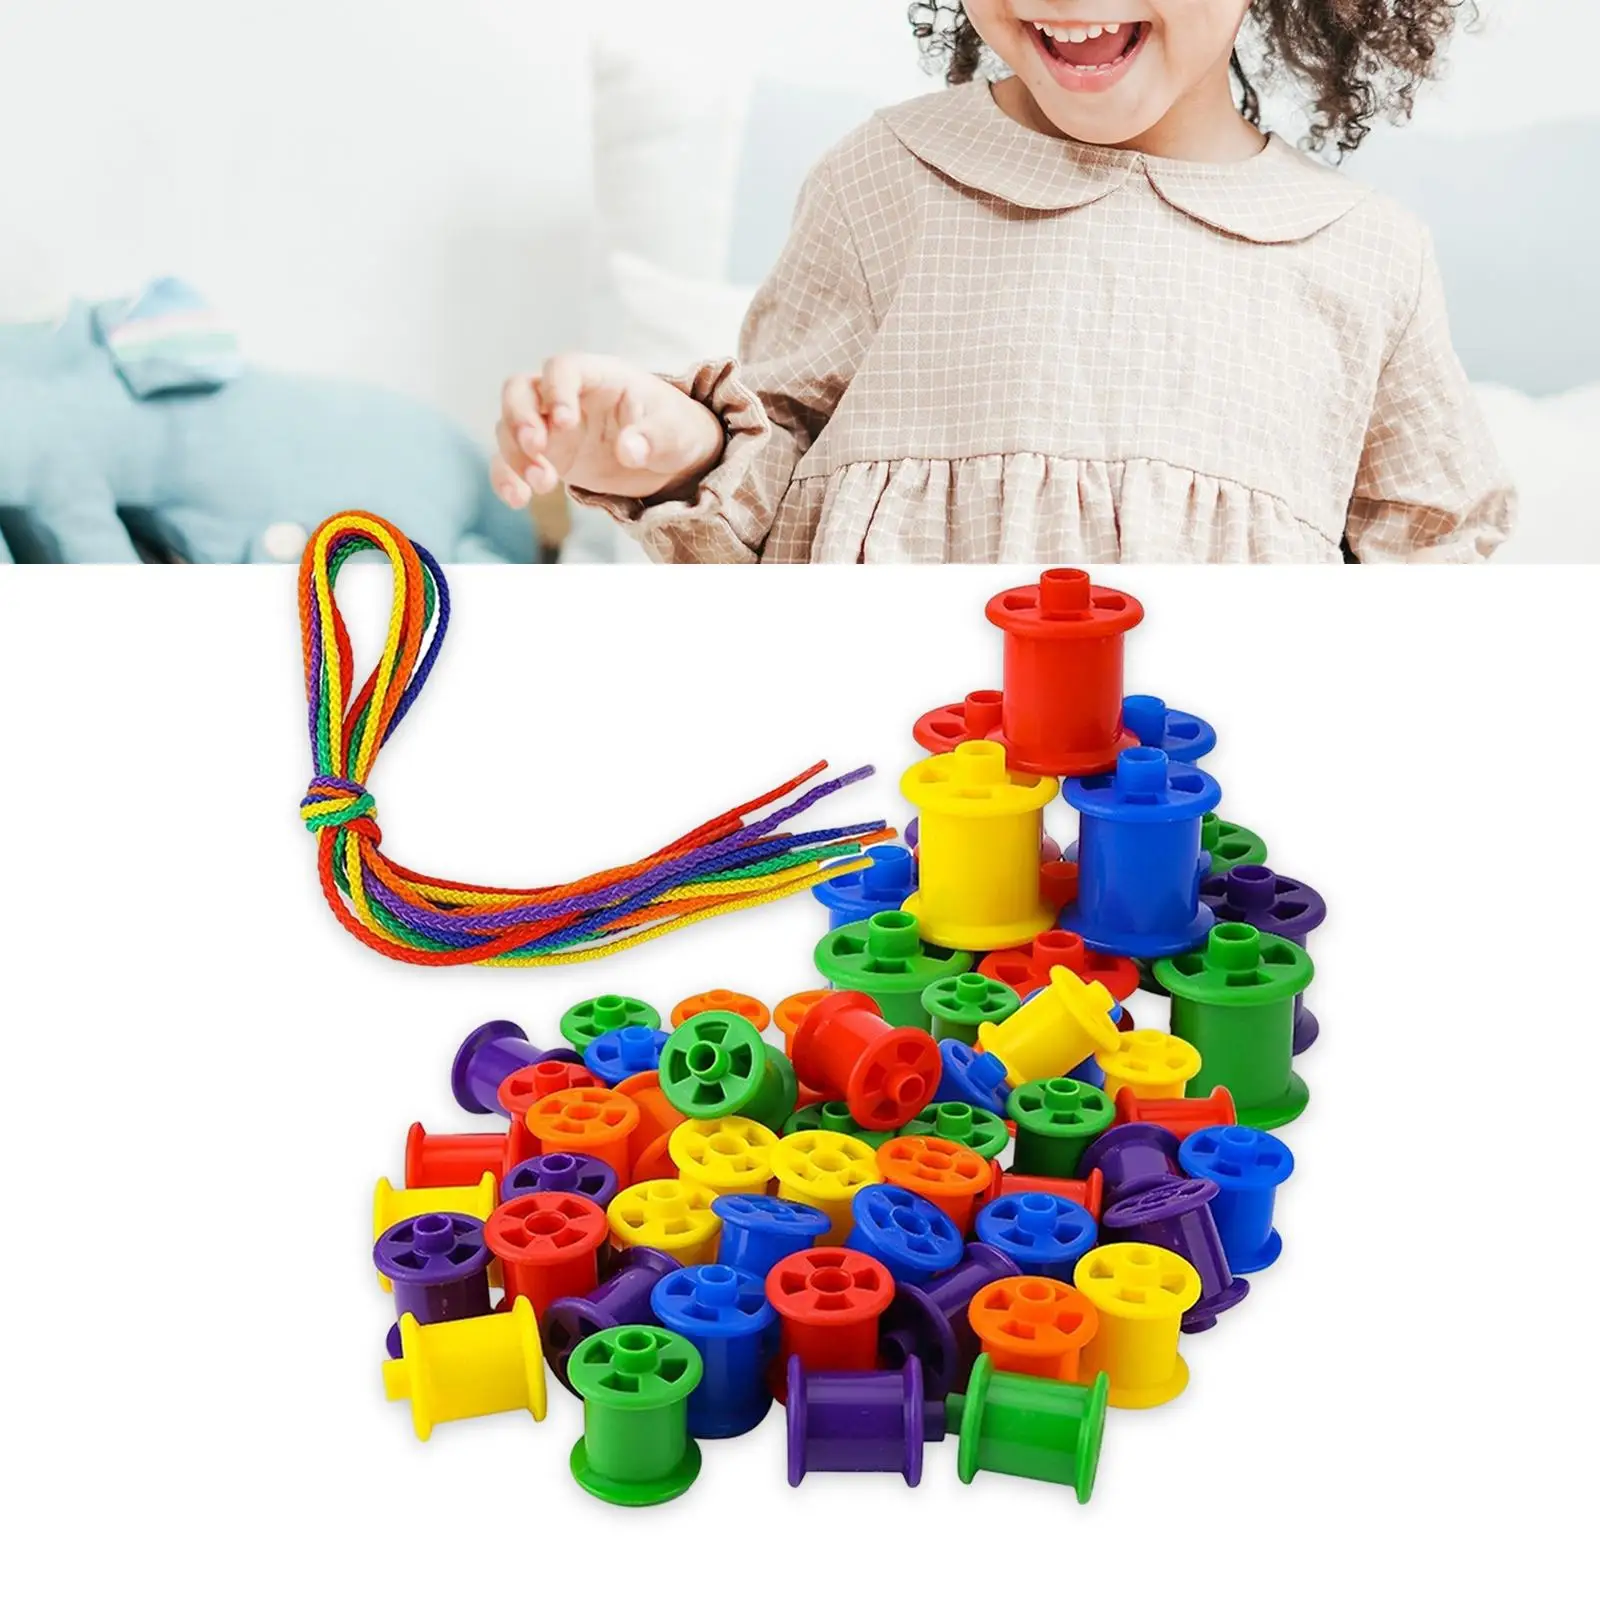 Lacing Beads Toy Early Education Cognition Gifts for Kindergarten Daycare